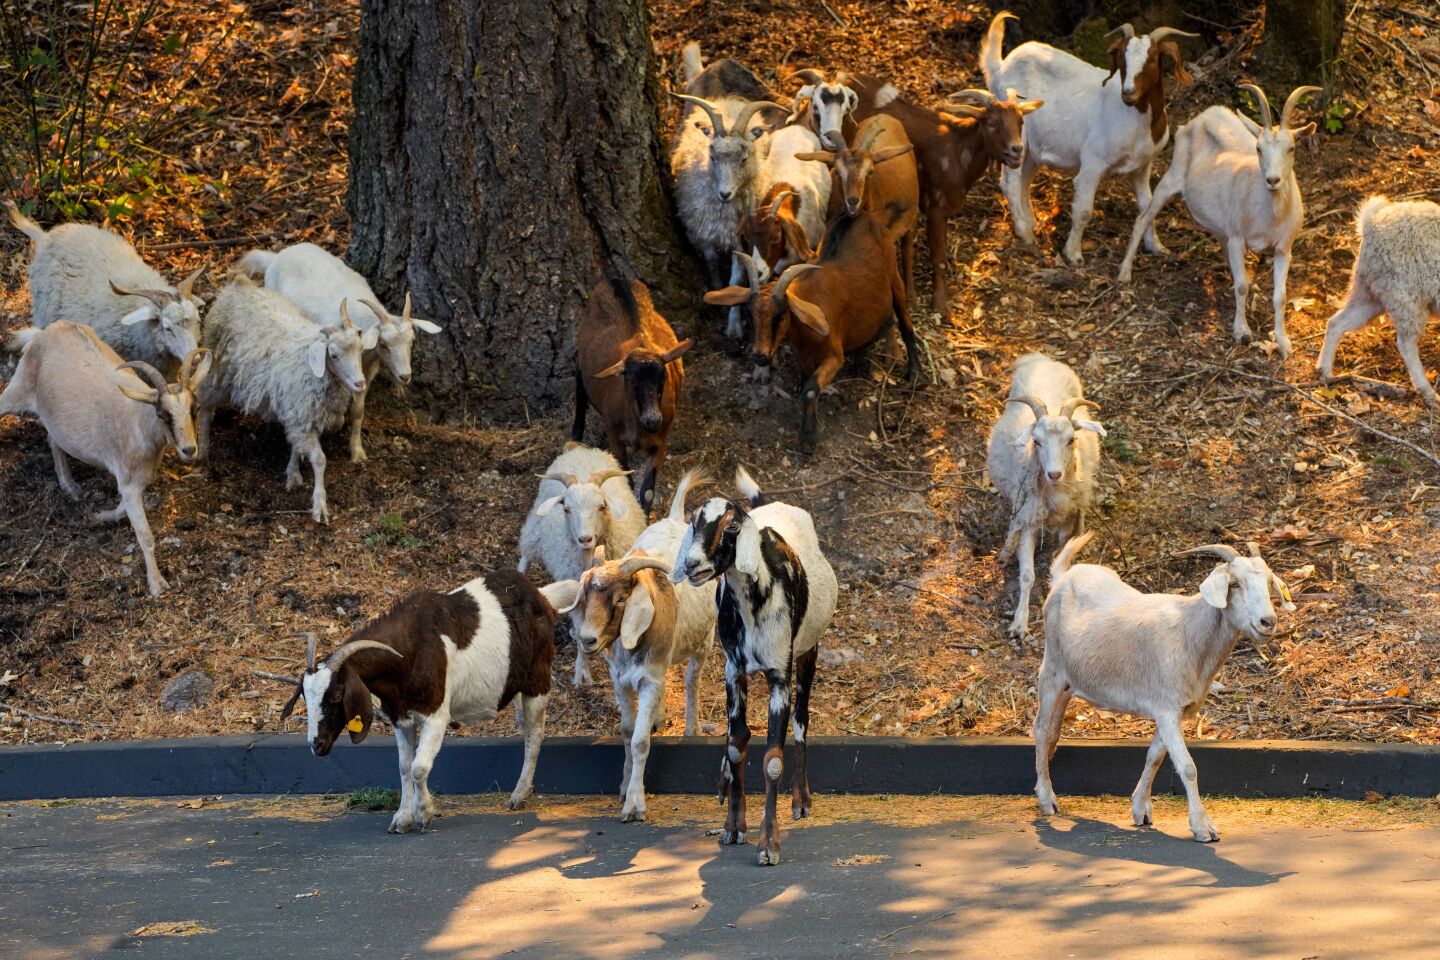 Goats group together during evacuation.